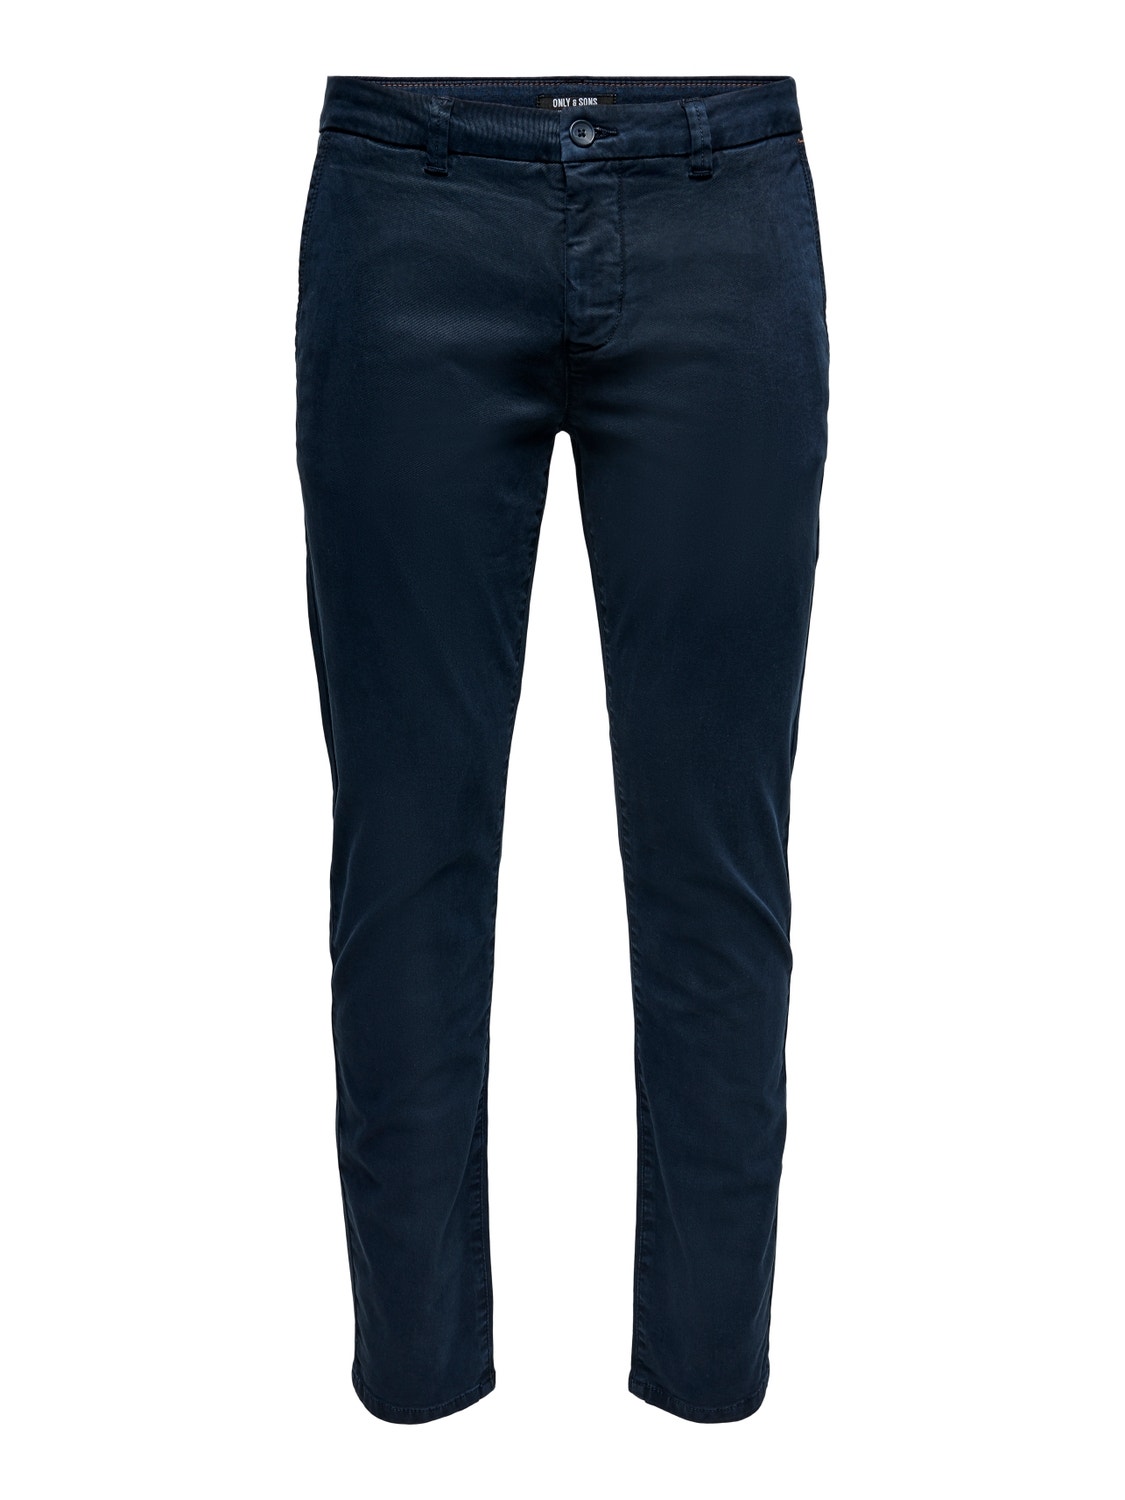 ONLY & SONS Mid waist chino trousers -Dark Navy - 22019934